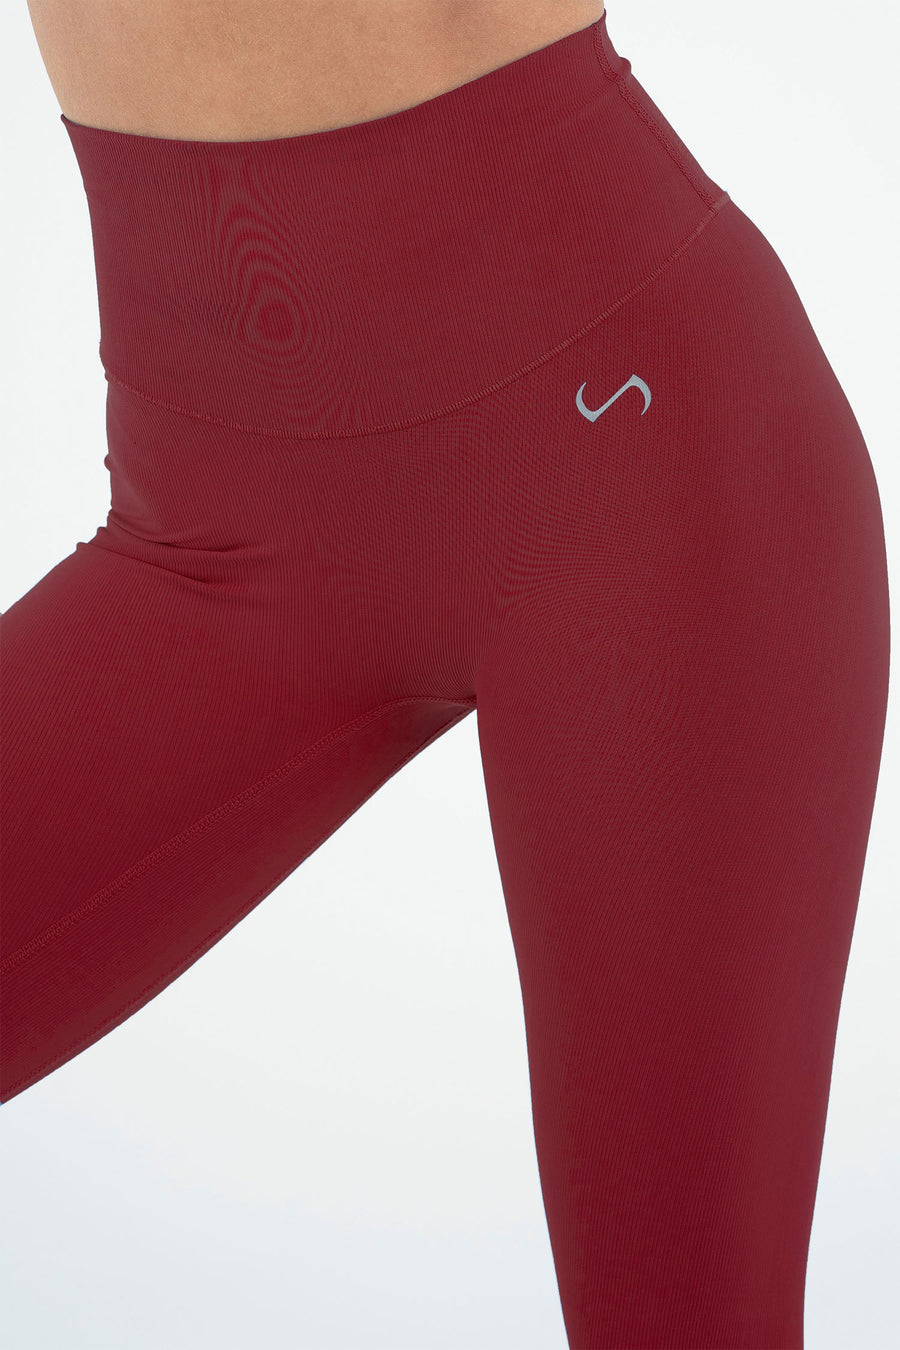 Tempo Ribbed High Waisted Workout Leggings 2.0 - Best Squat Proof Leggings   - Deep - Ruby - 4